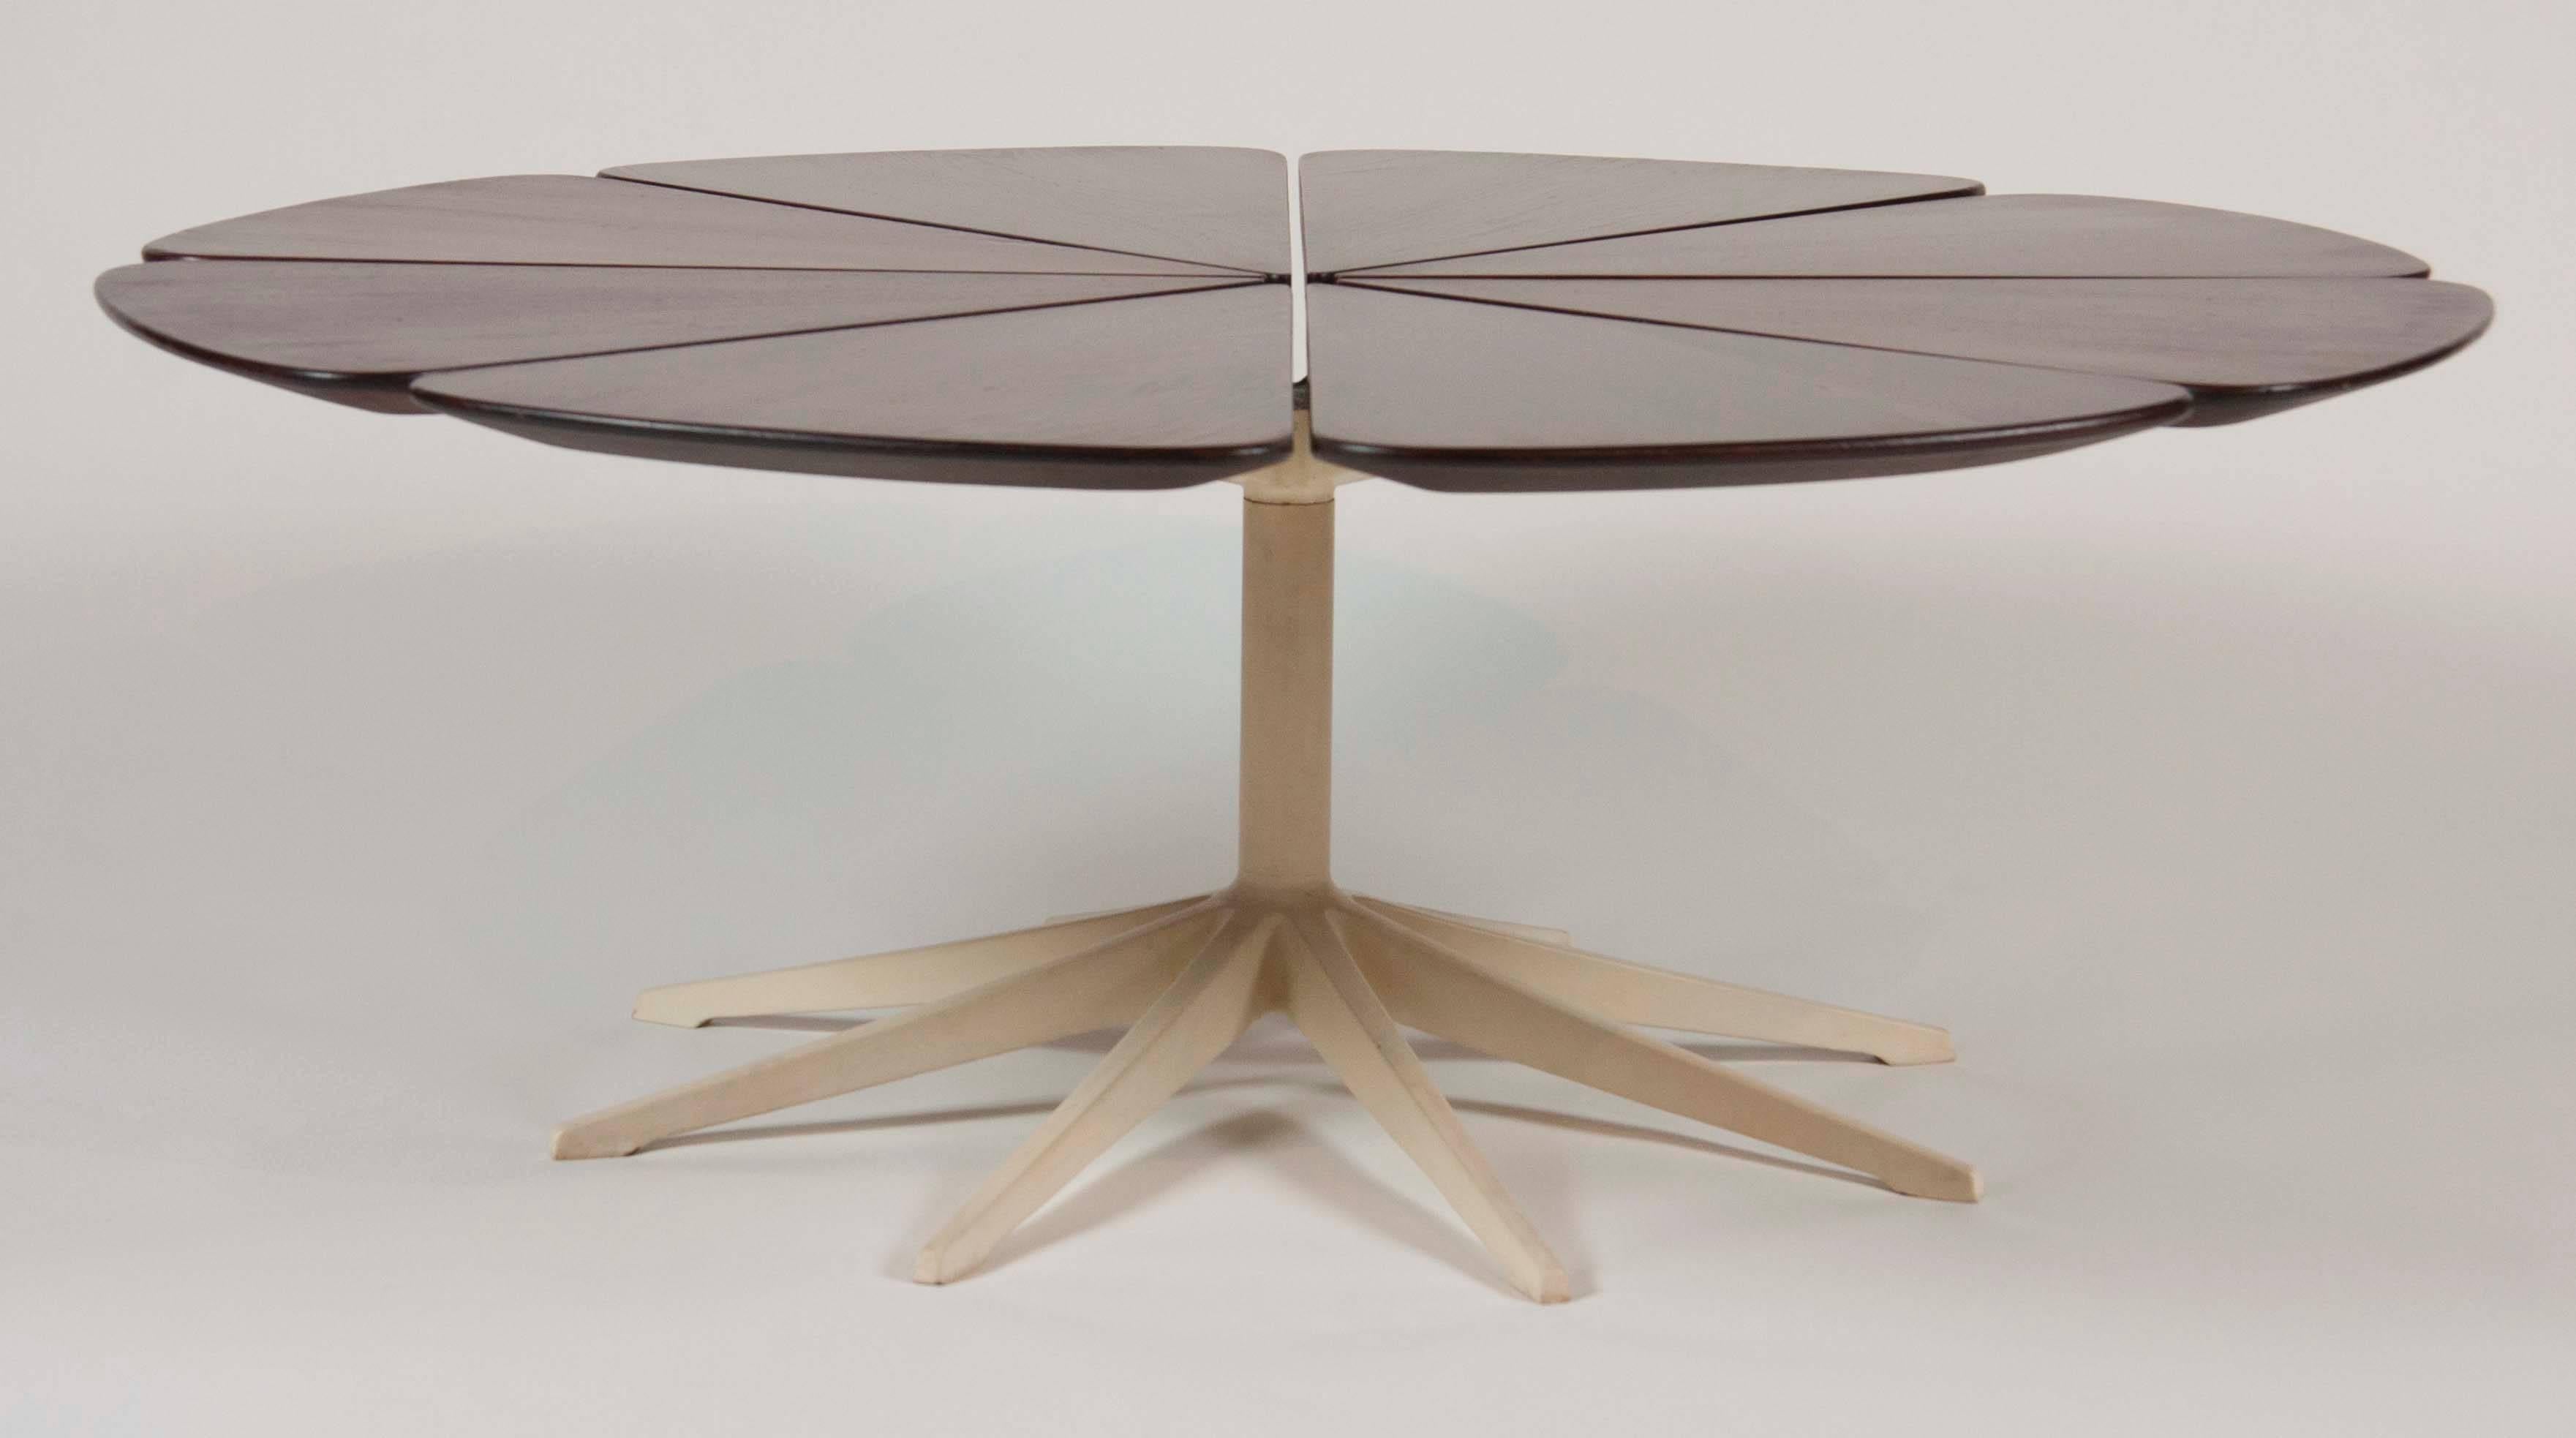 A Richard Schultz redwood Petal Coffee Table with enameled base. This Model 321 with redwood petals was made from 1960-75. Made by Knoll with a canvas Madison Avenue label.
